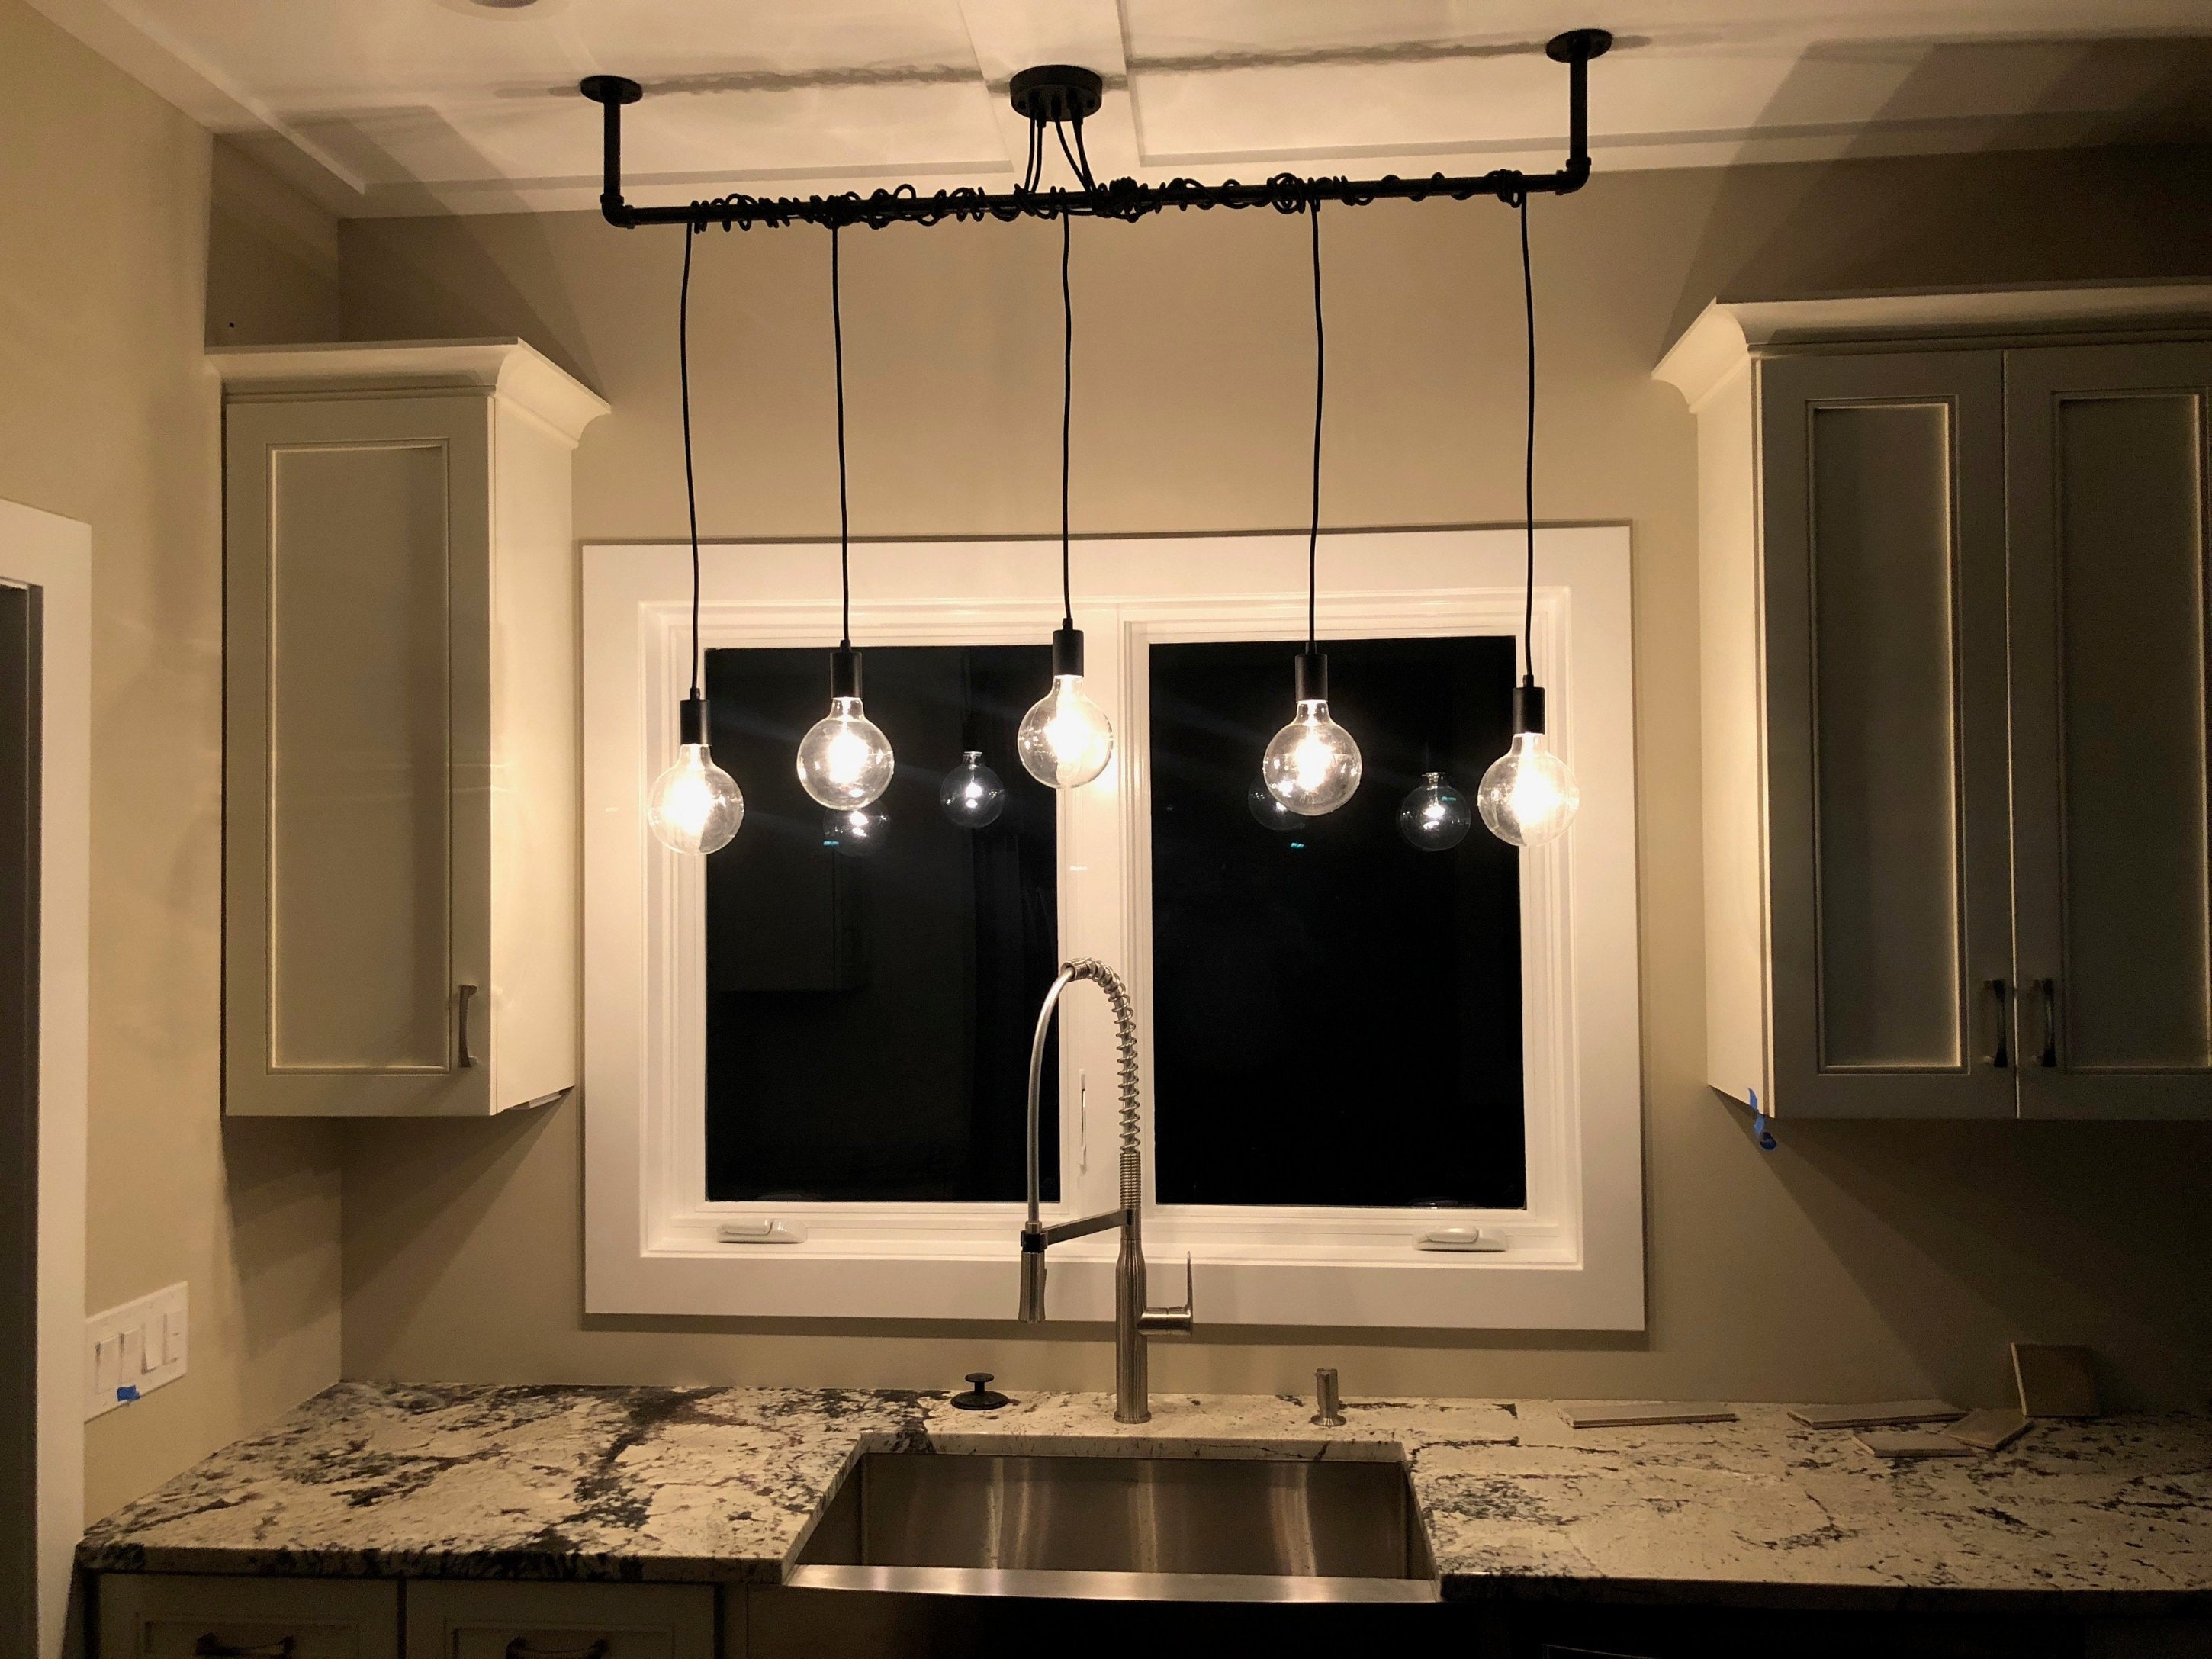 examples of pendant light over kitchen sink